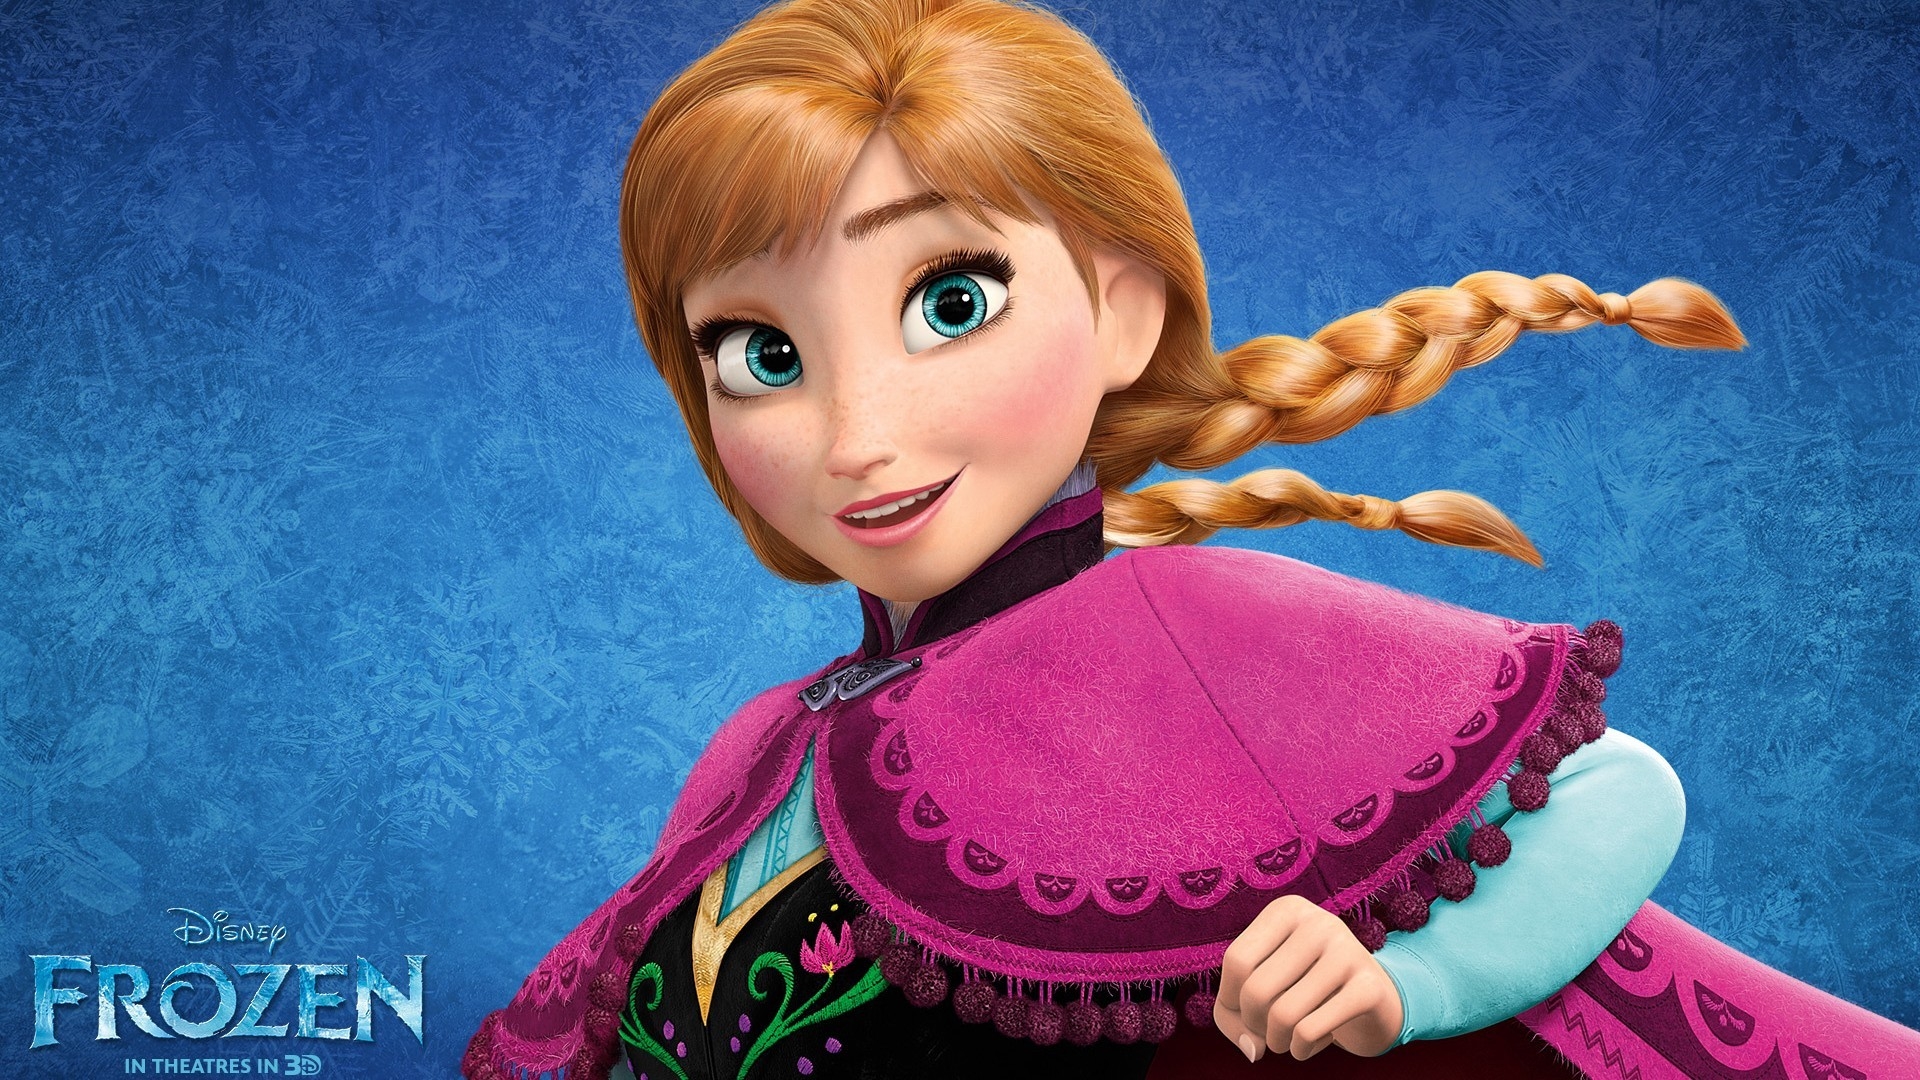 Frozen Movie Character for 1920 x 1080 HDTV 1080p resolution